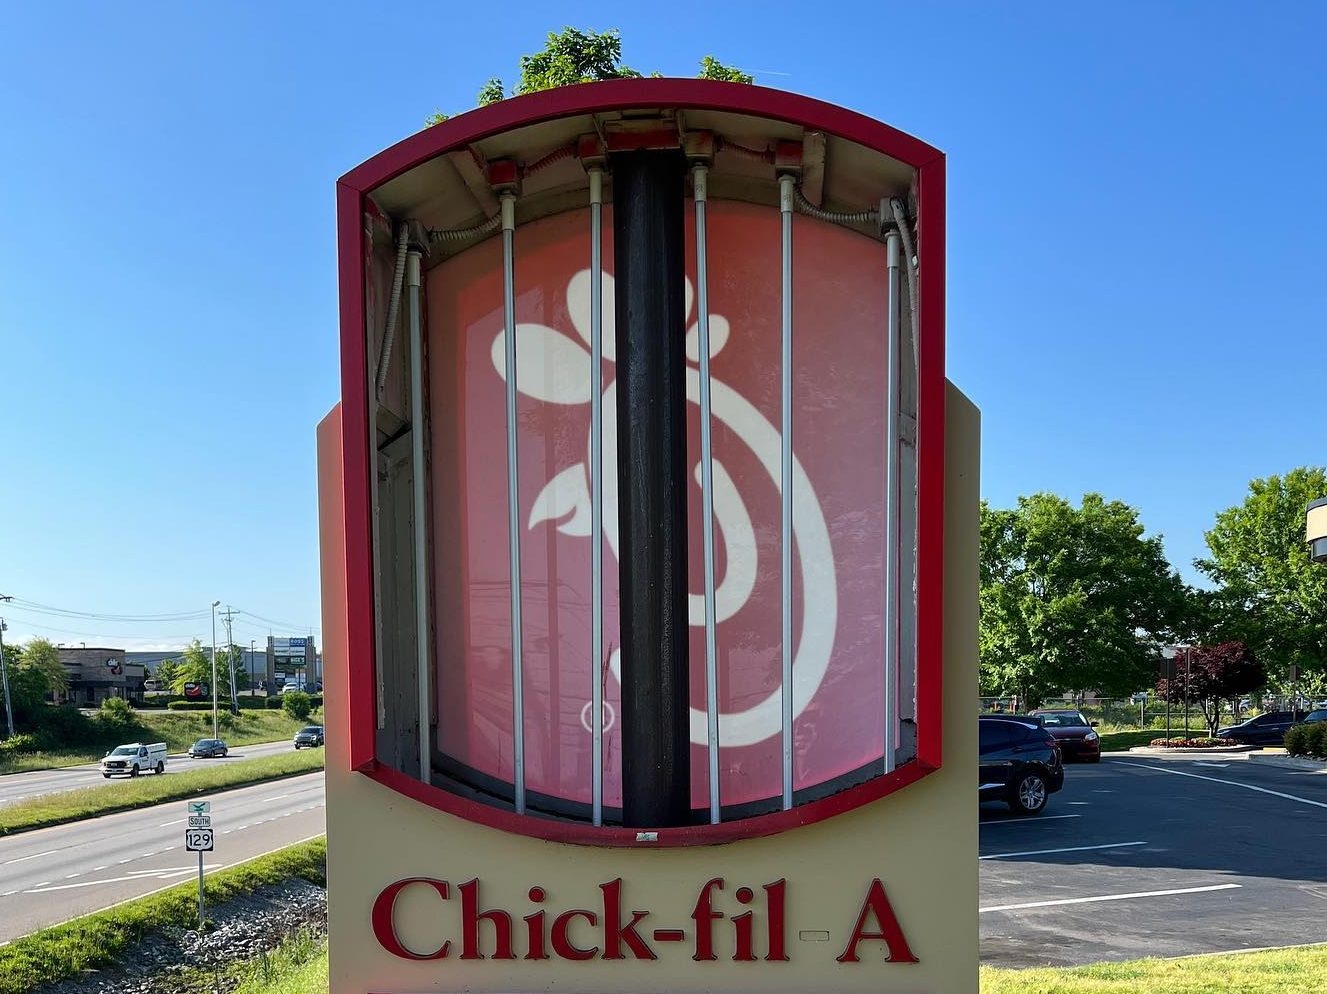 Chick-fil-A sign missing the chicken sketch part of the sign.